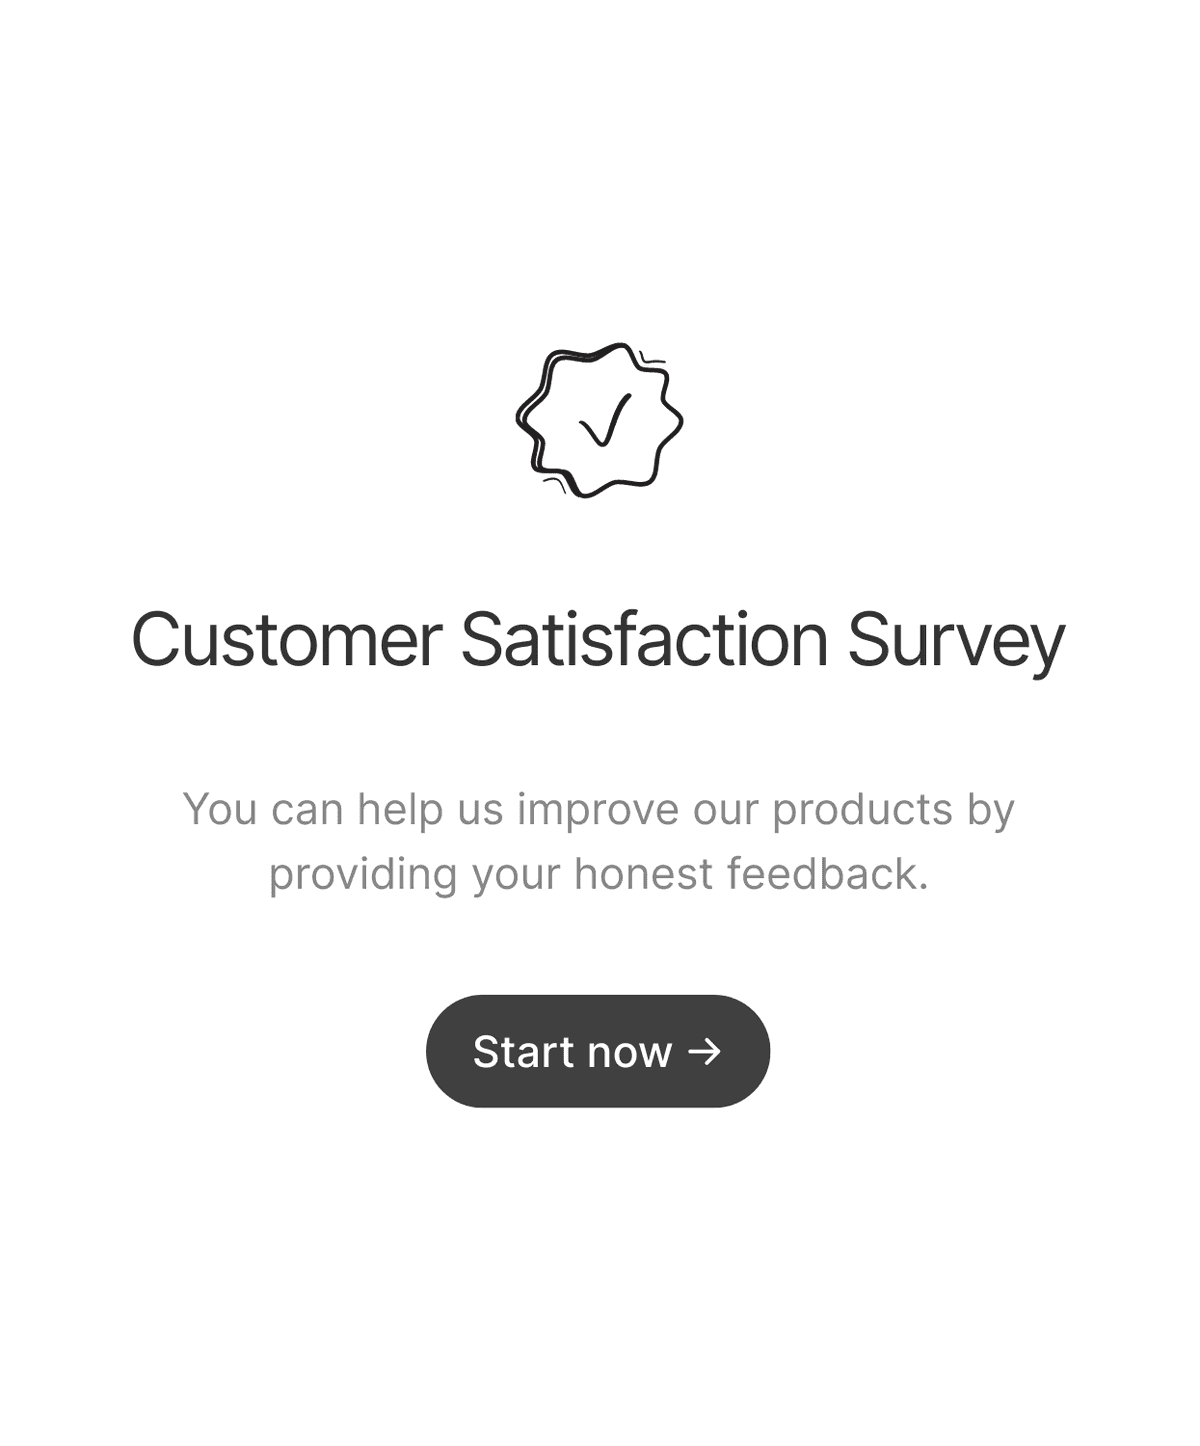 Welcome page of a CSAT survey with an illustration, welcome text, and a 'Start now' button